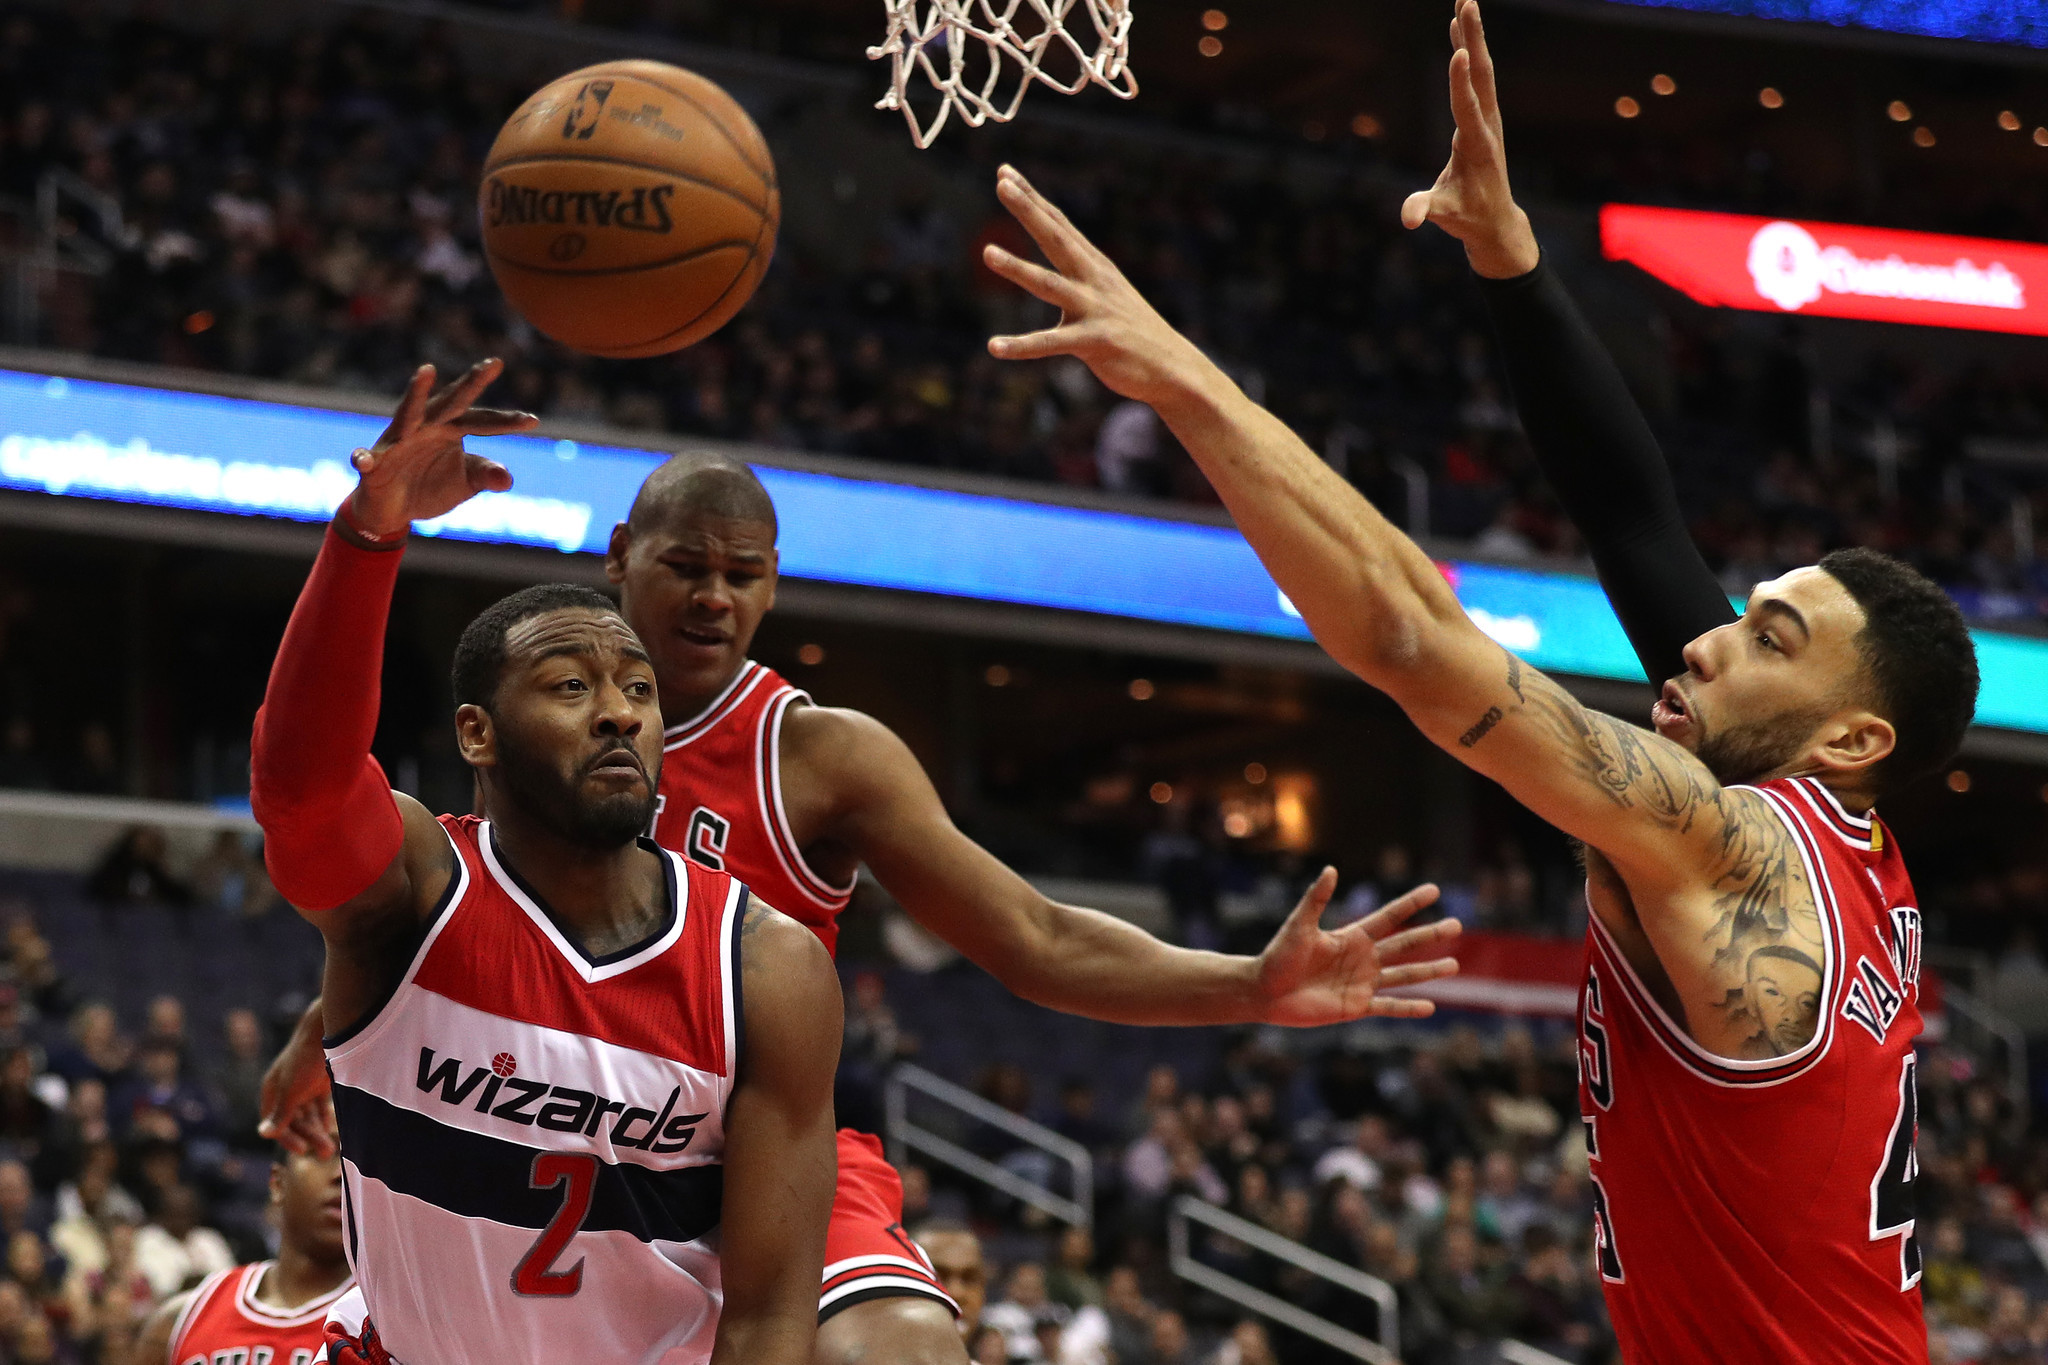 Shorthanded Bulls lead Wizards 61-49 at half